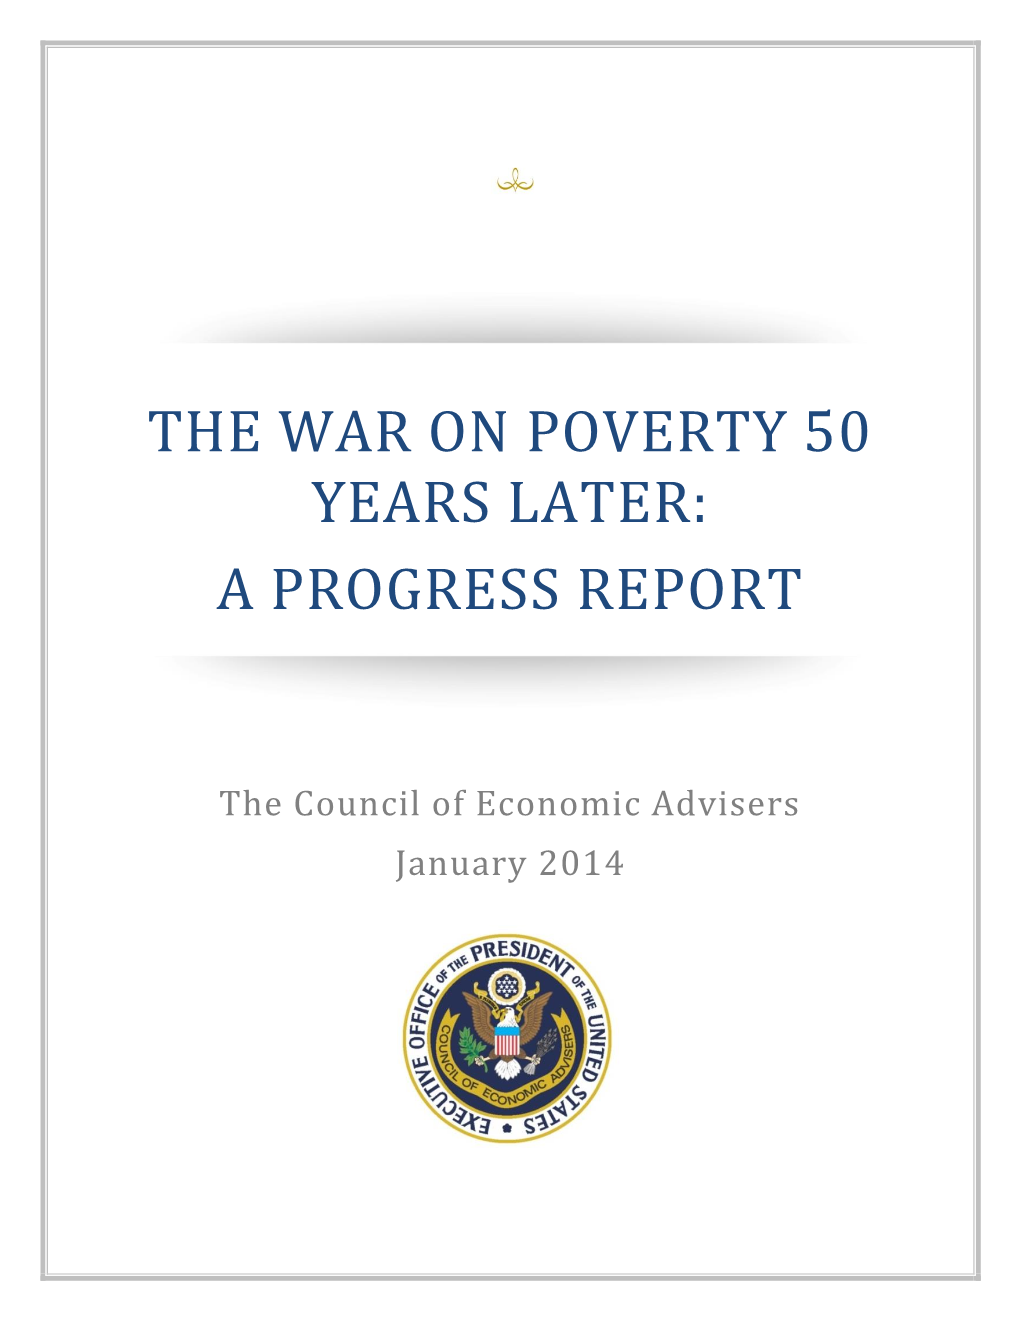 The War on Poverty 50 Years Later: a Progress Report